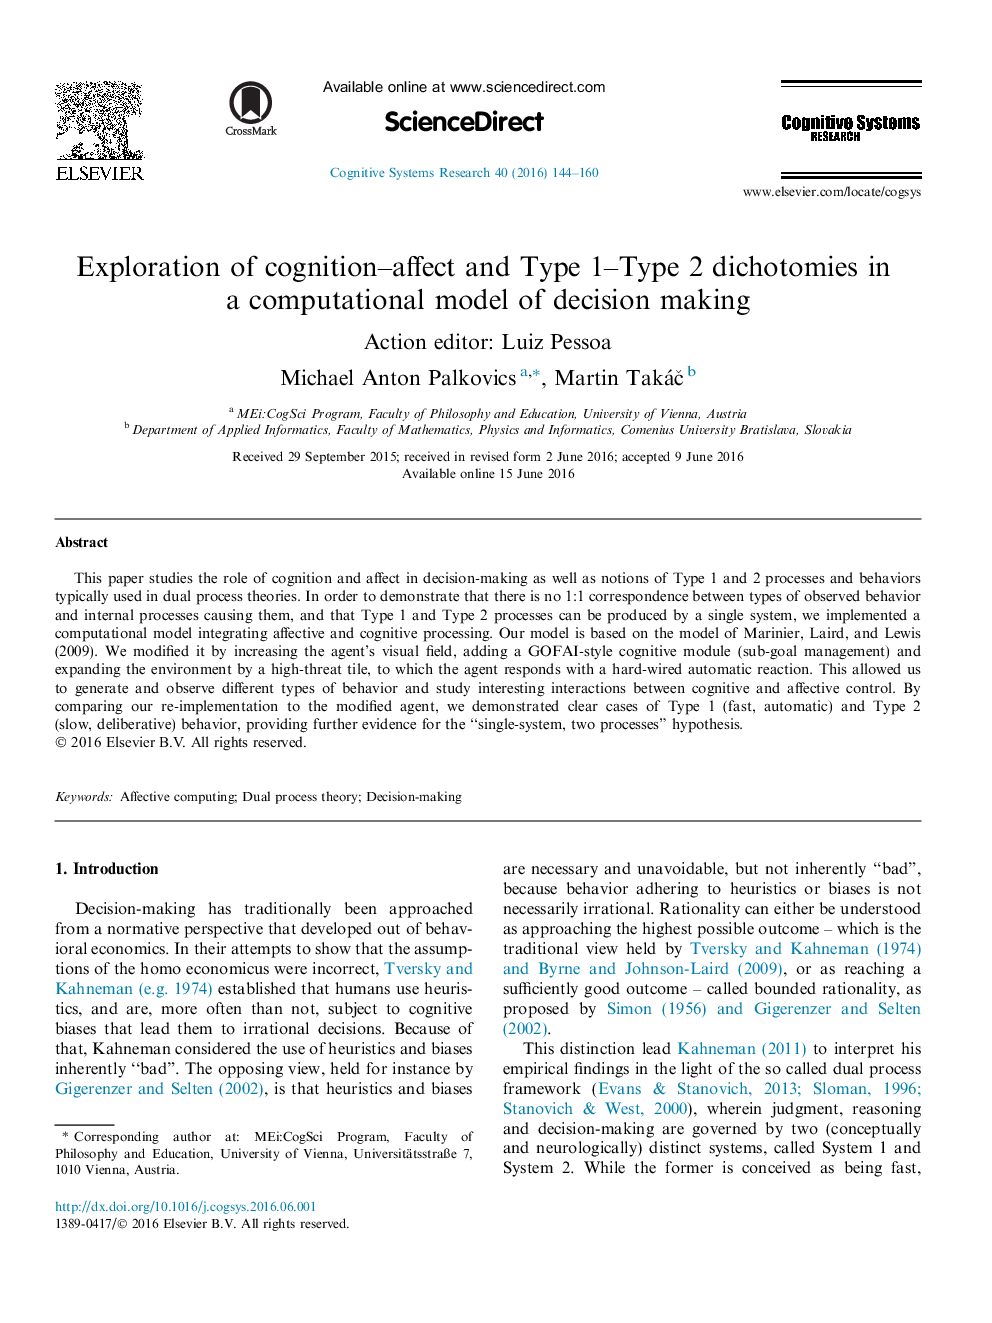 Exploration of cognition–affect and Type 1–Type 2 dichotomies in a computational model of decision making